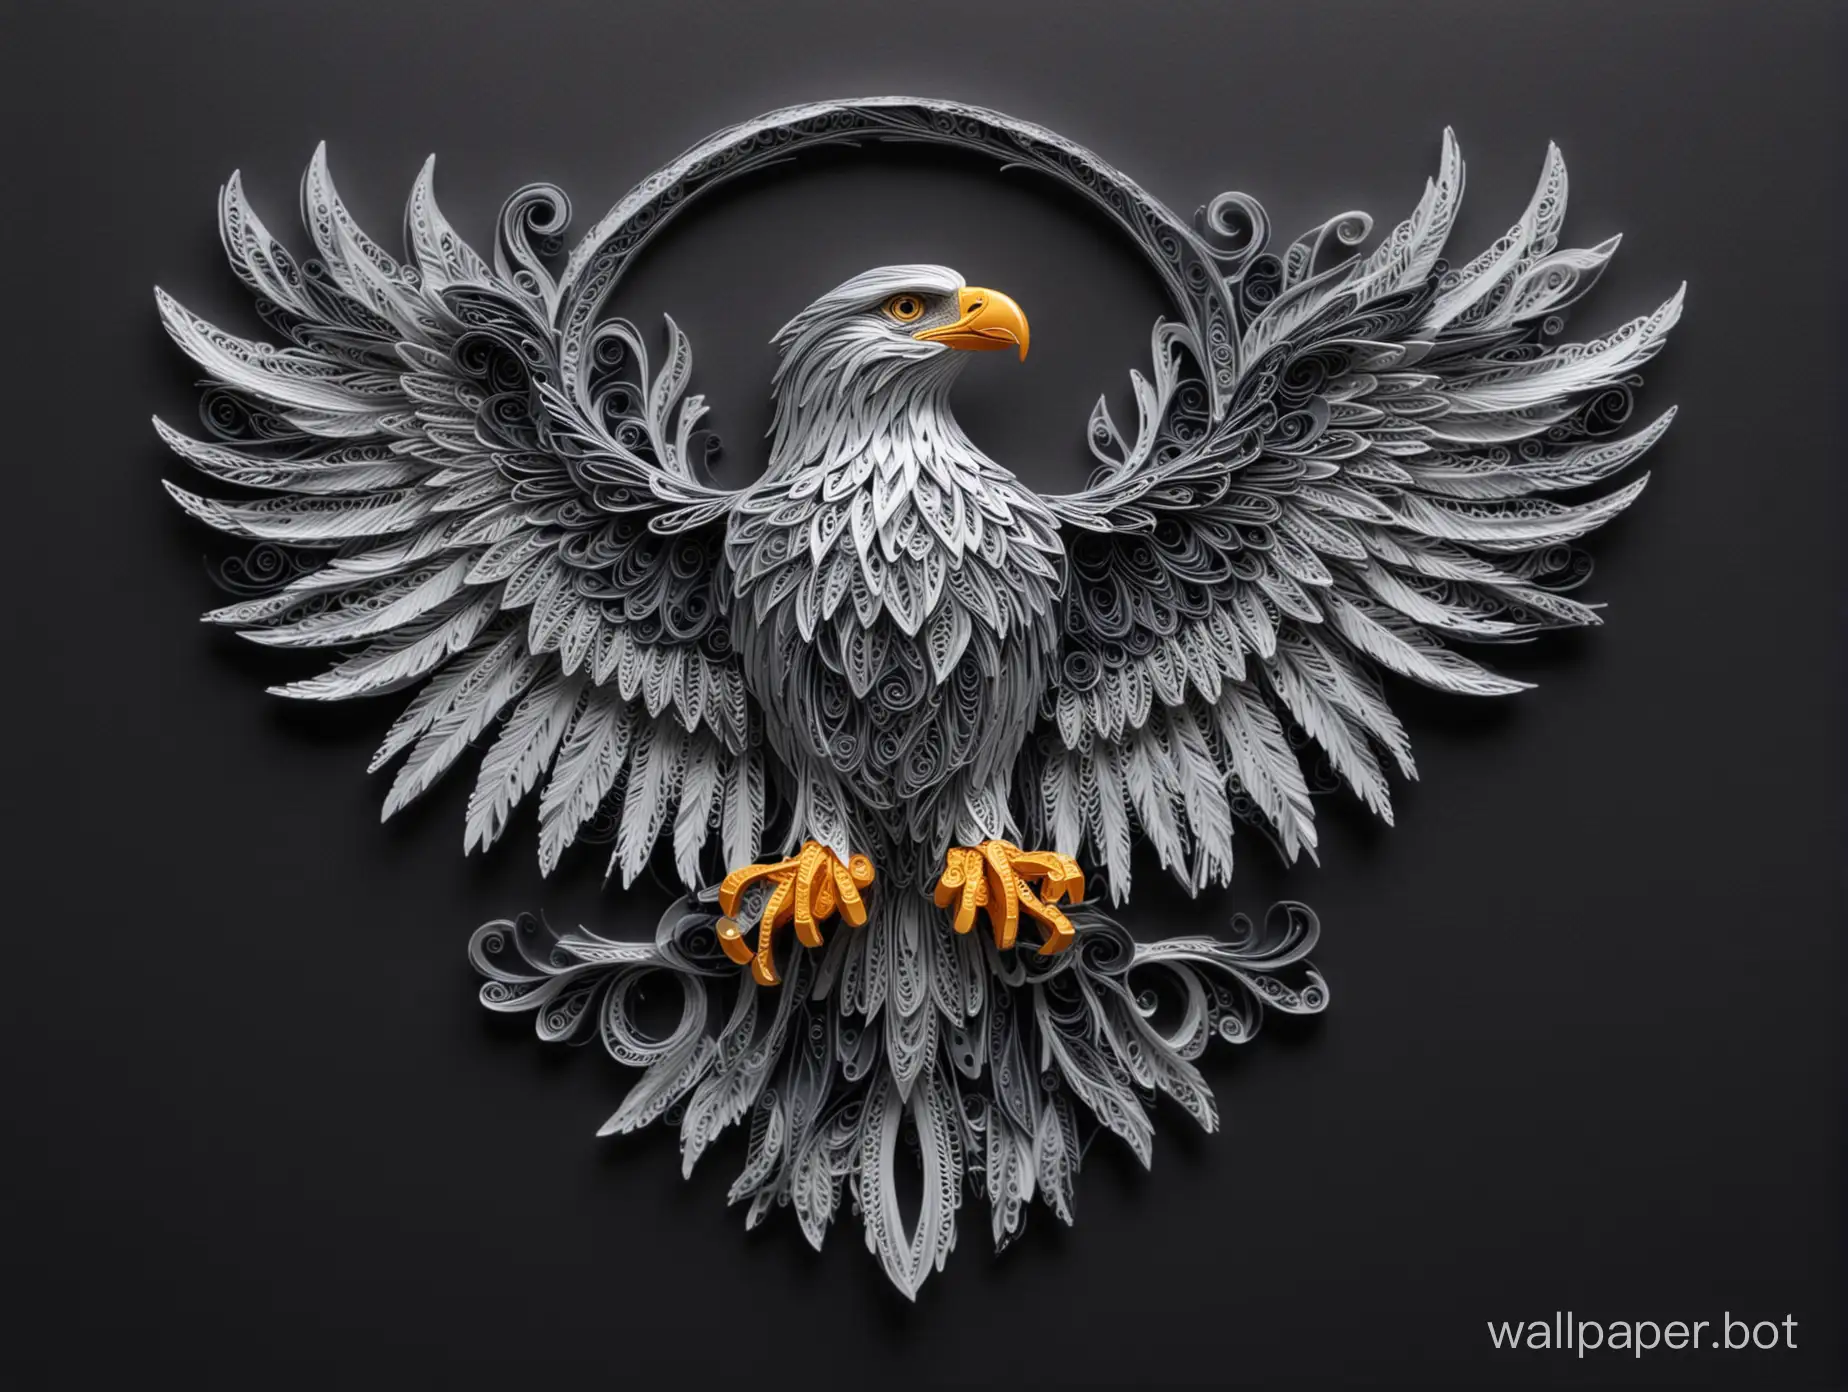 Silver-Eagle-Papercraft-Quilling-Art-with-Decorative-Flames